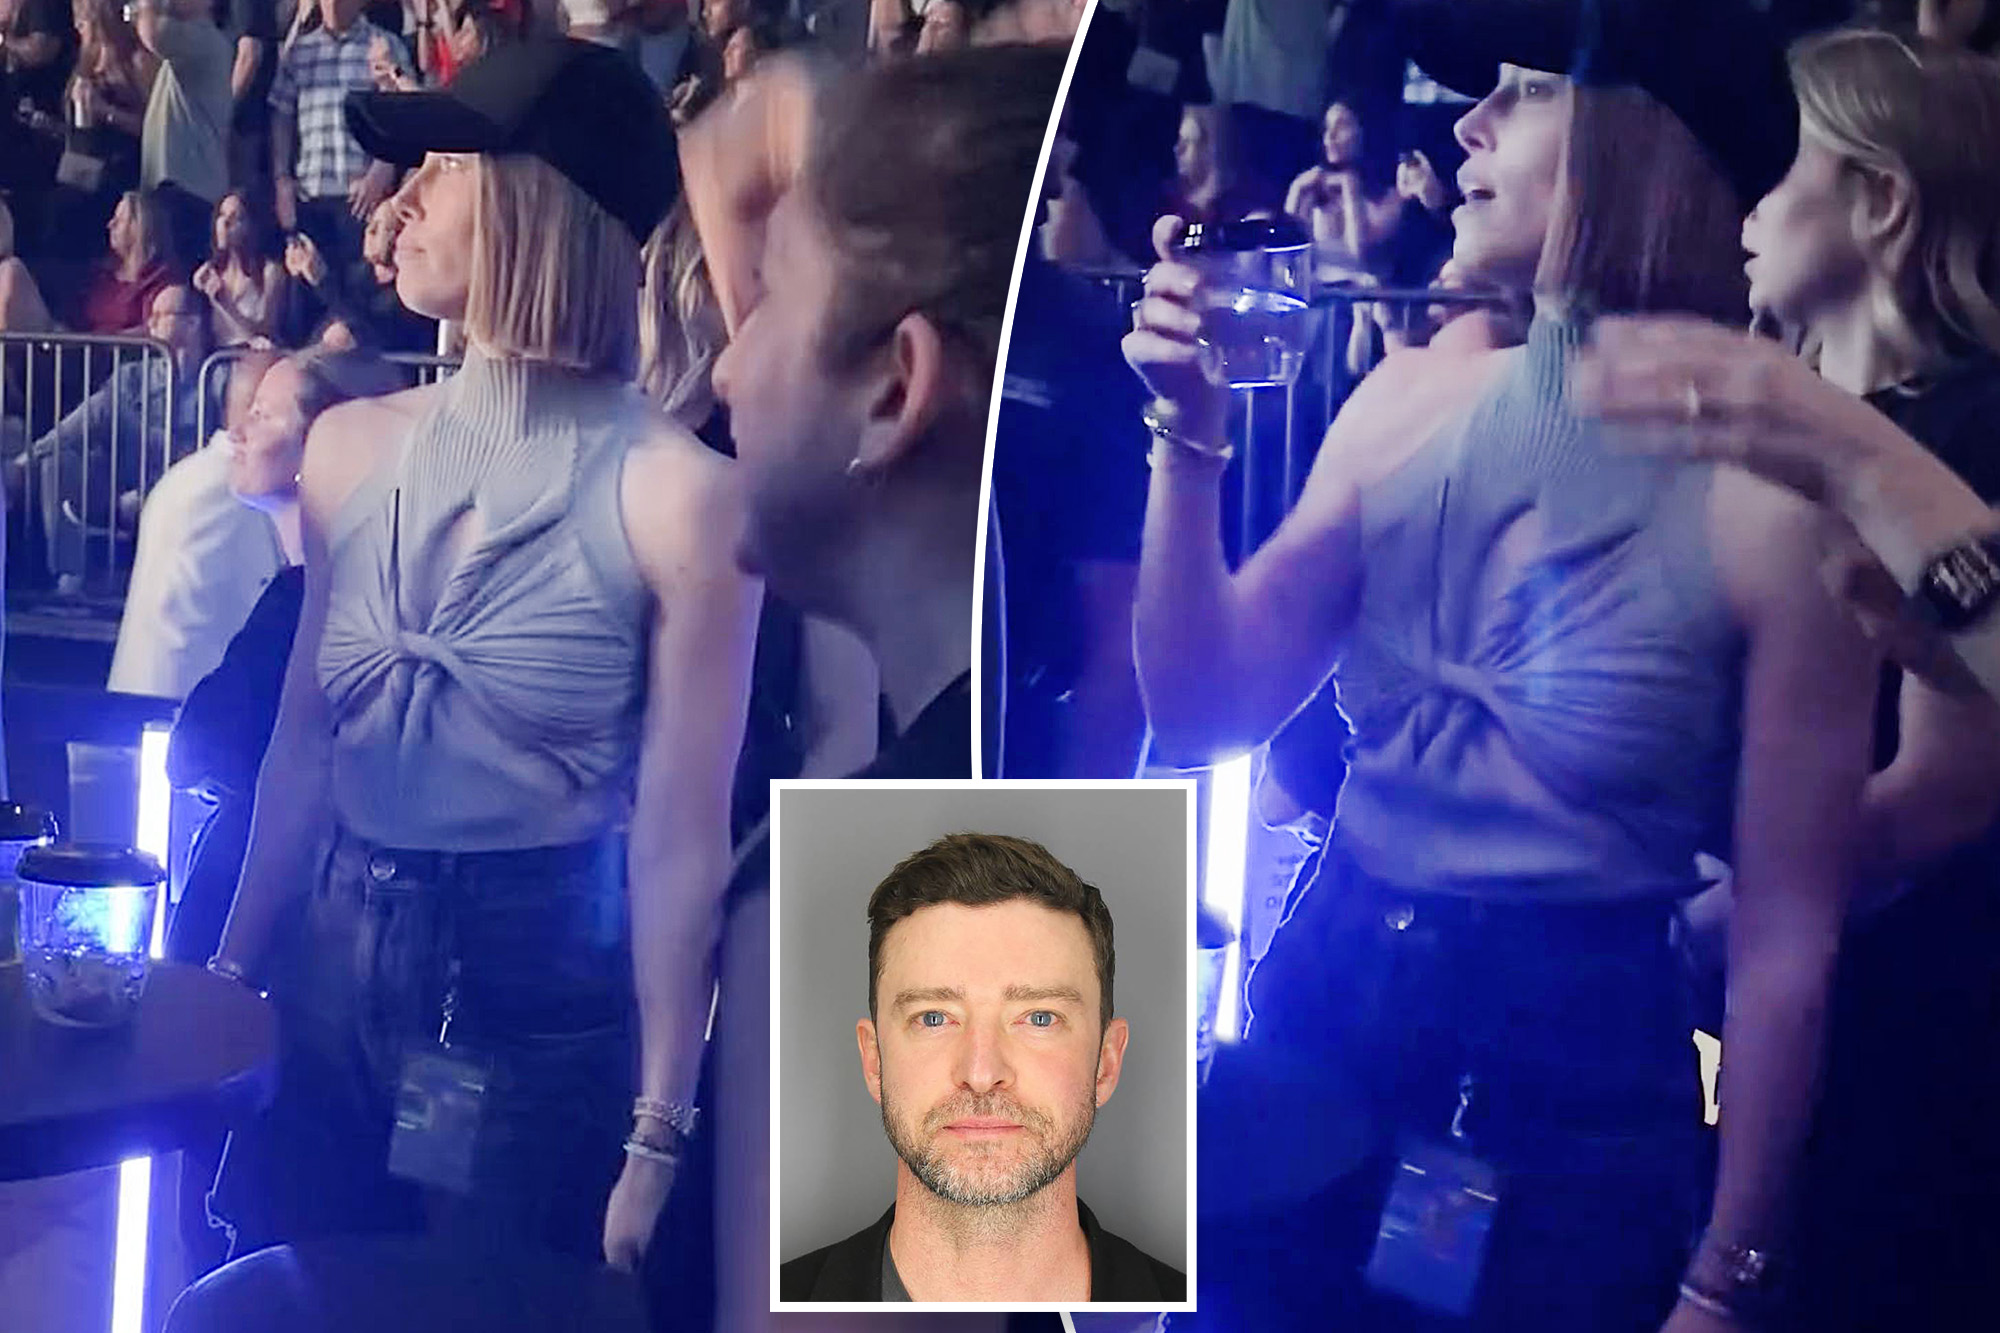 Jessica Biel's Epic Night Out at Justin Timberlake's Concert After DWI Drama Will Make You Cheer!